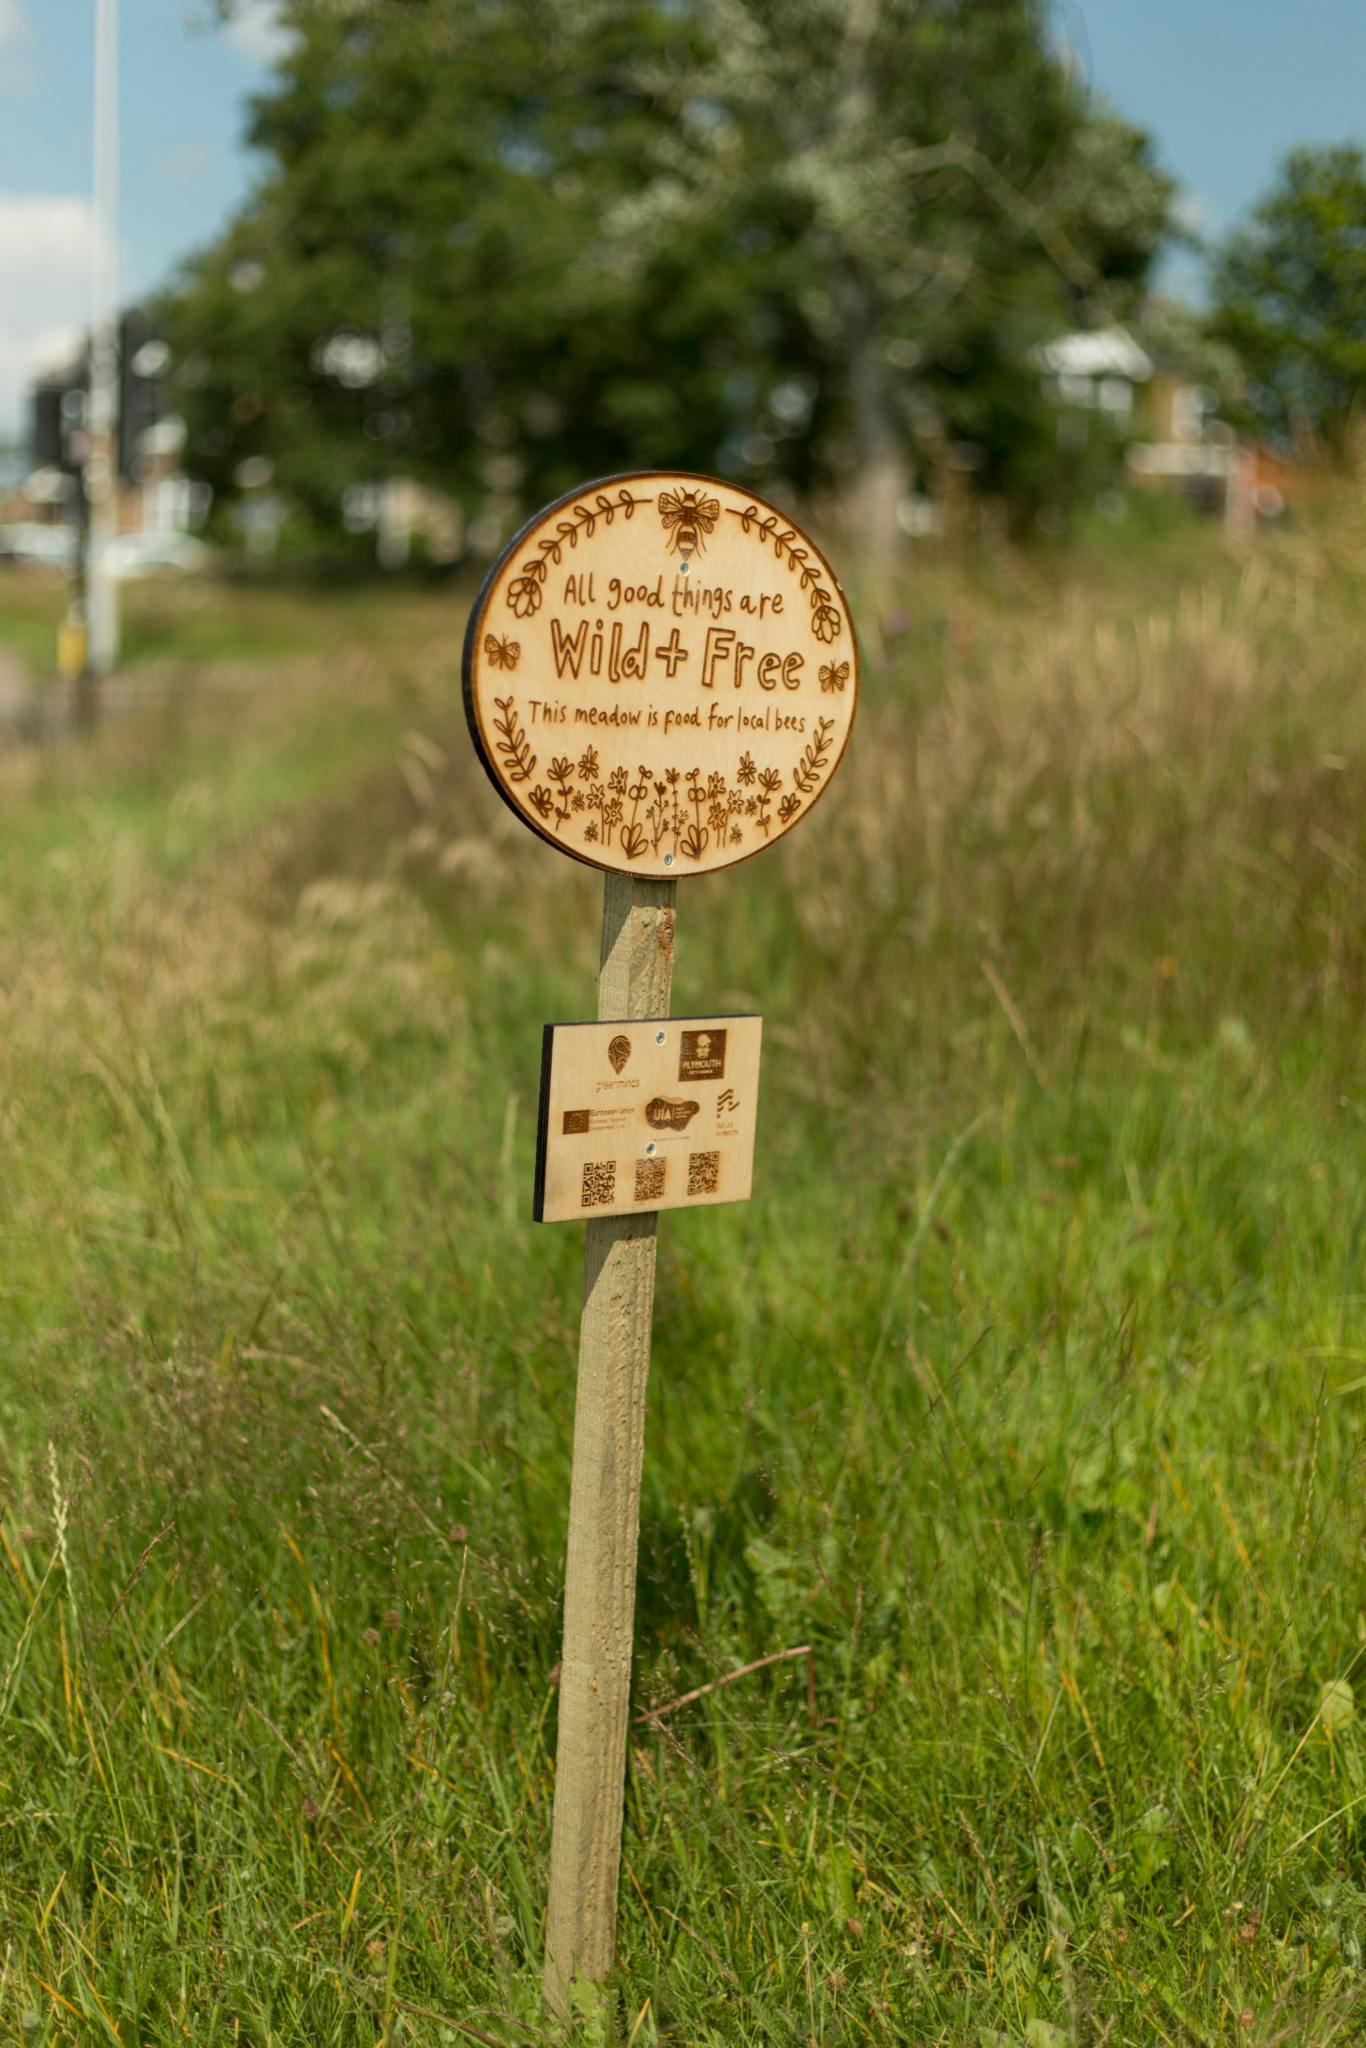 Wildflower meadow sign designed by Genevieve Stewart Image Credit Ray Goodwin